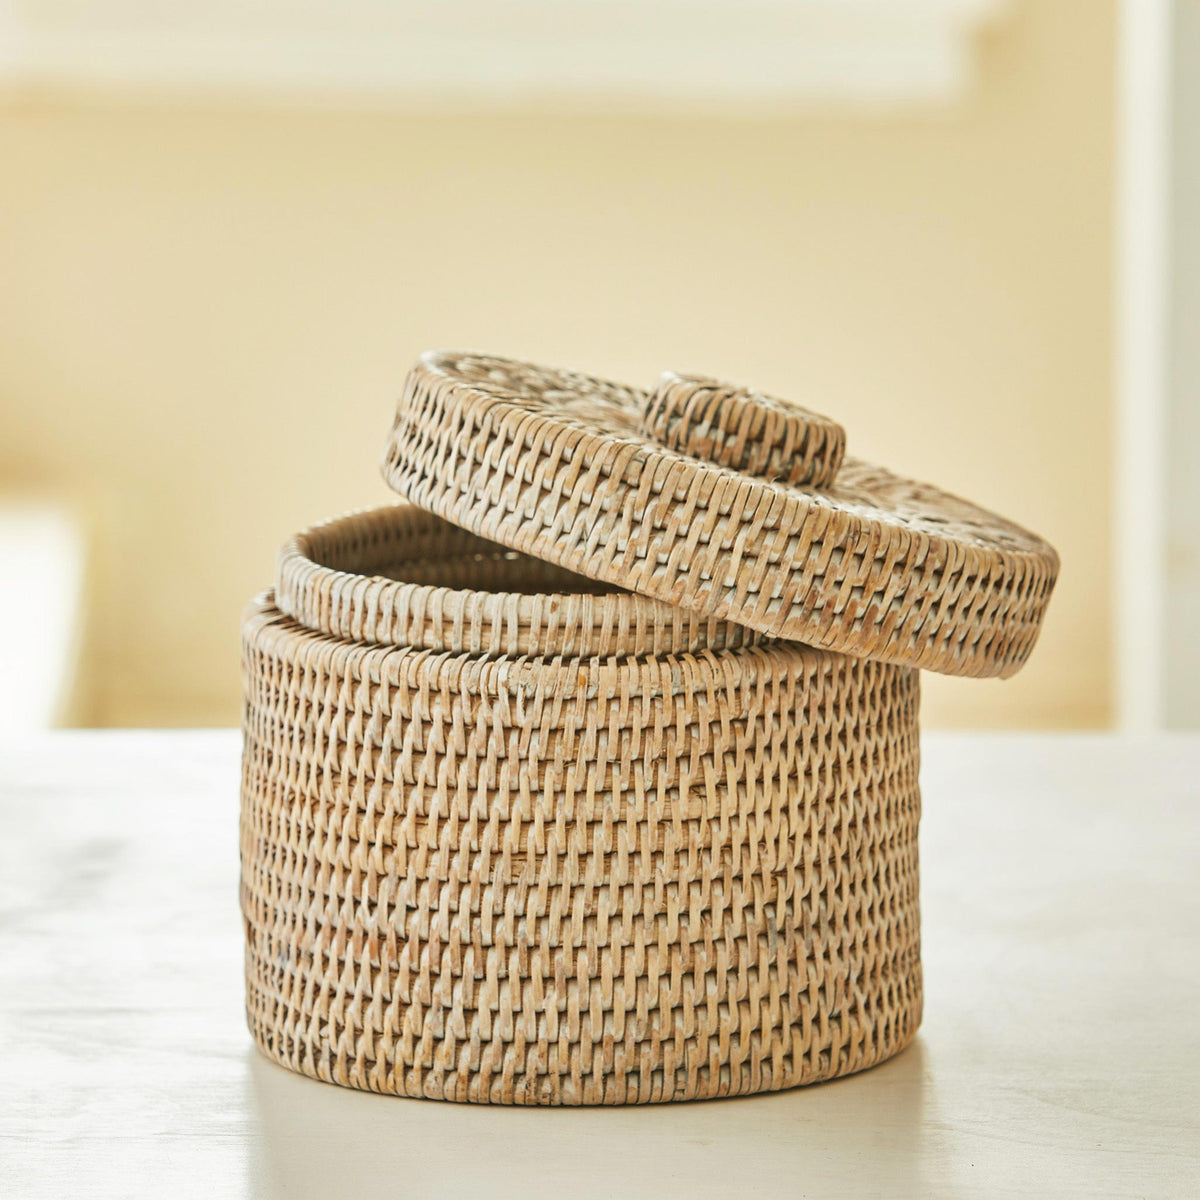 Beautiful Rattan Toilet Roll Holder. Traditional craftsmanship, tough, durable rattan toilet roll storage with lid. Natural and sustainable.